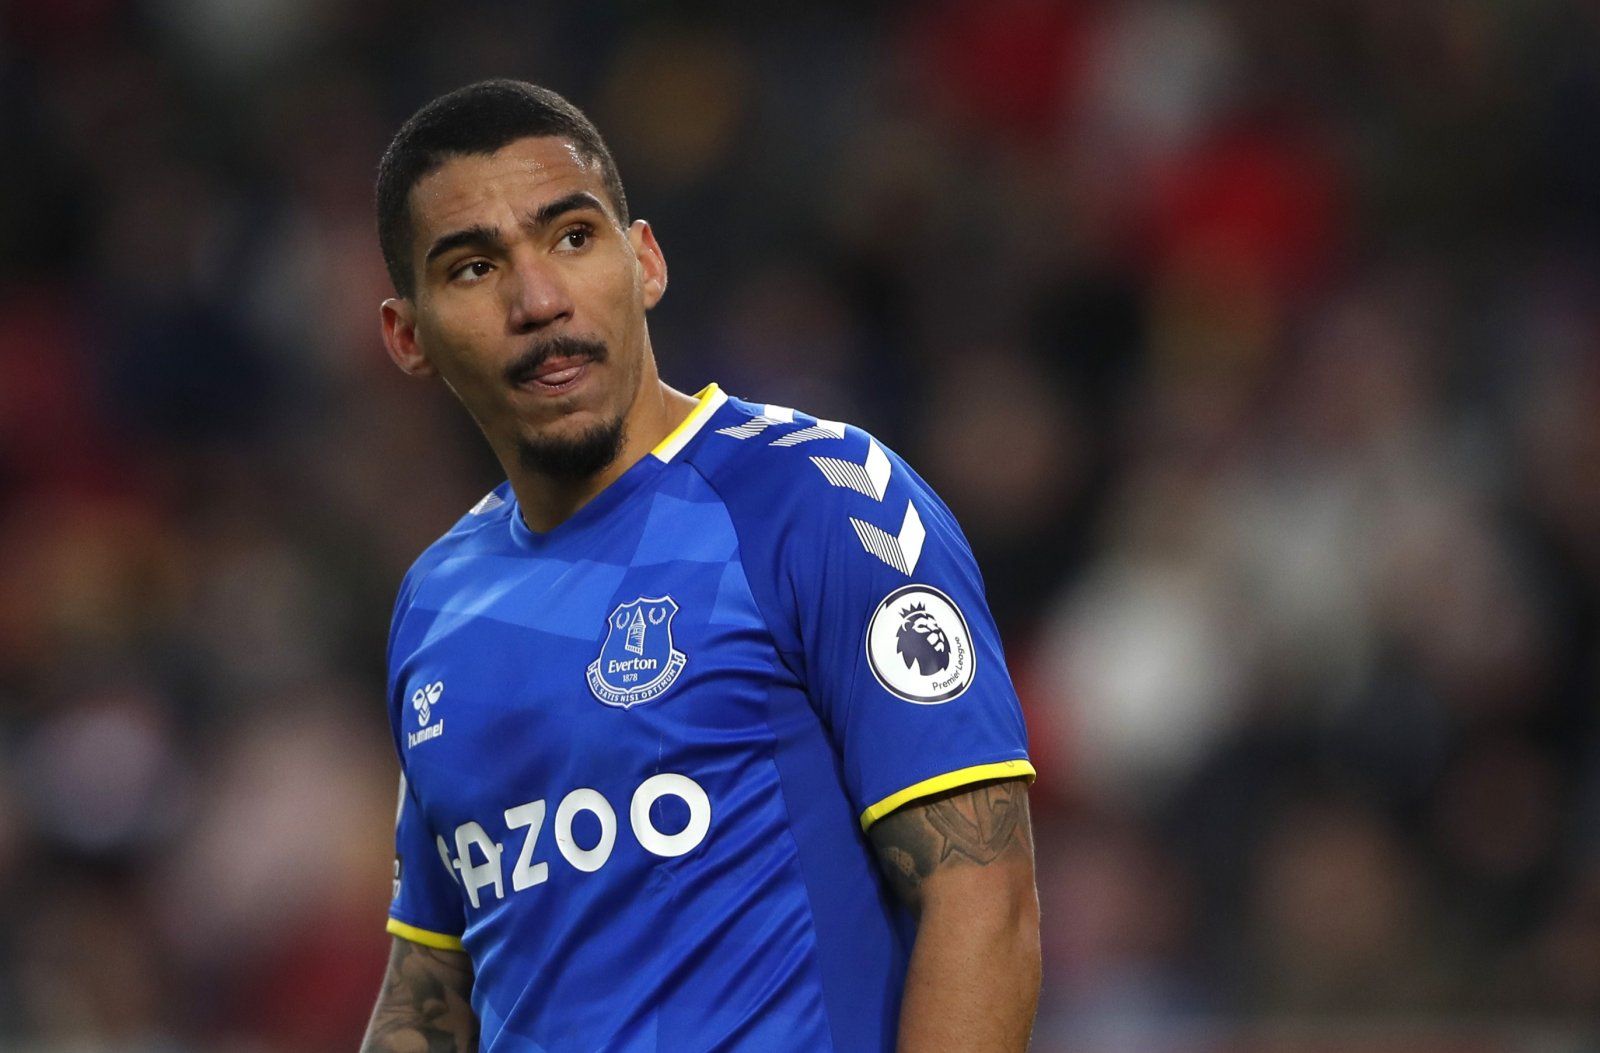 Everton: Allan in talks to leave for United Arab Emirates -Everton News